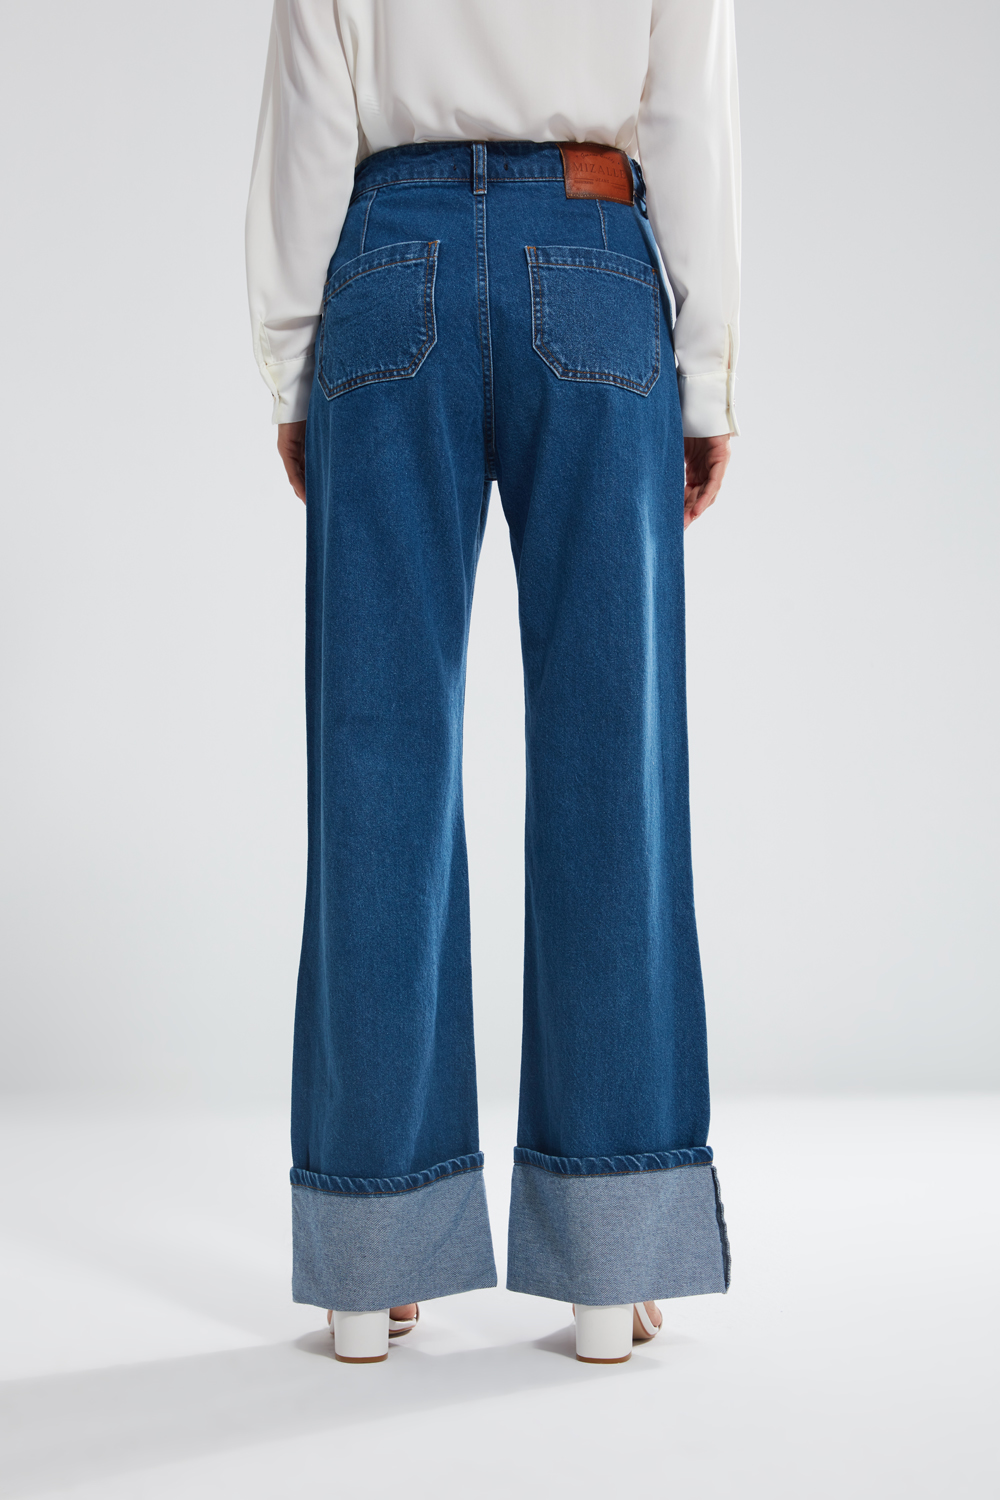 Laser Embroidered Blue High Waist Jean Trousers